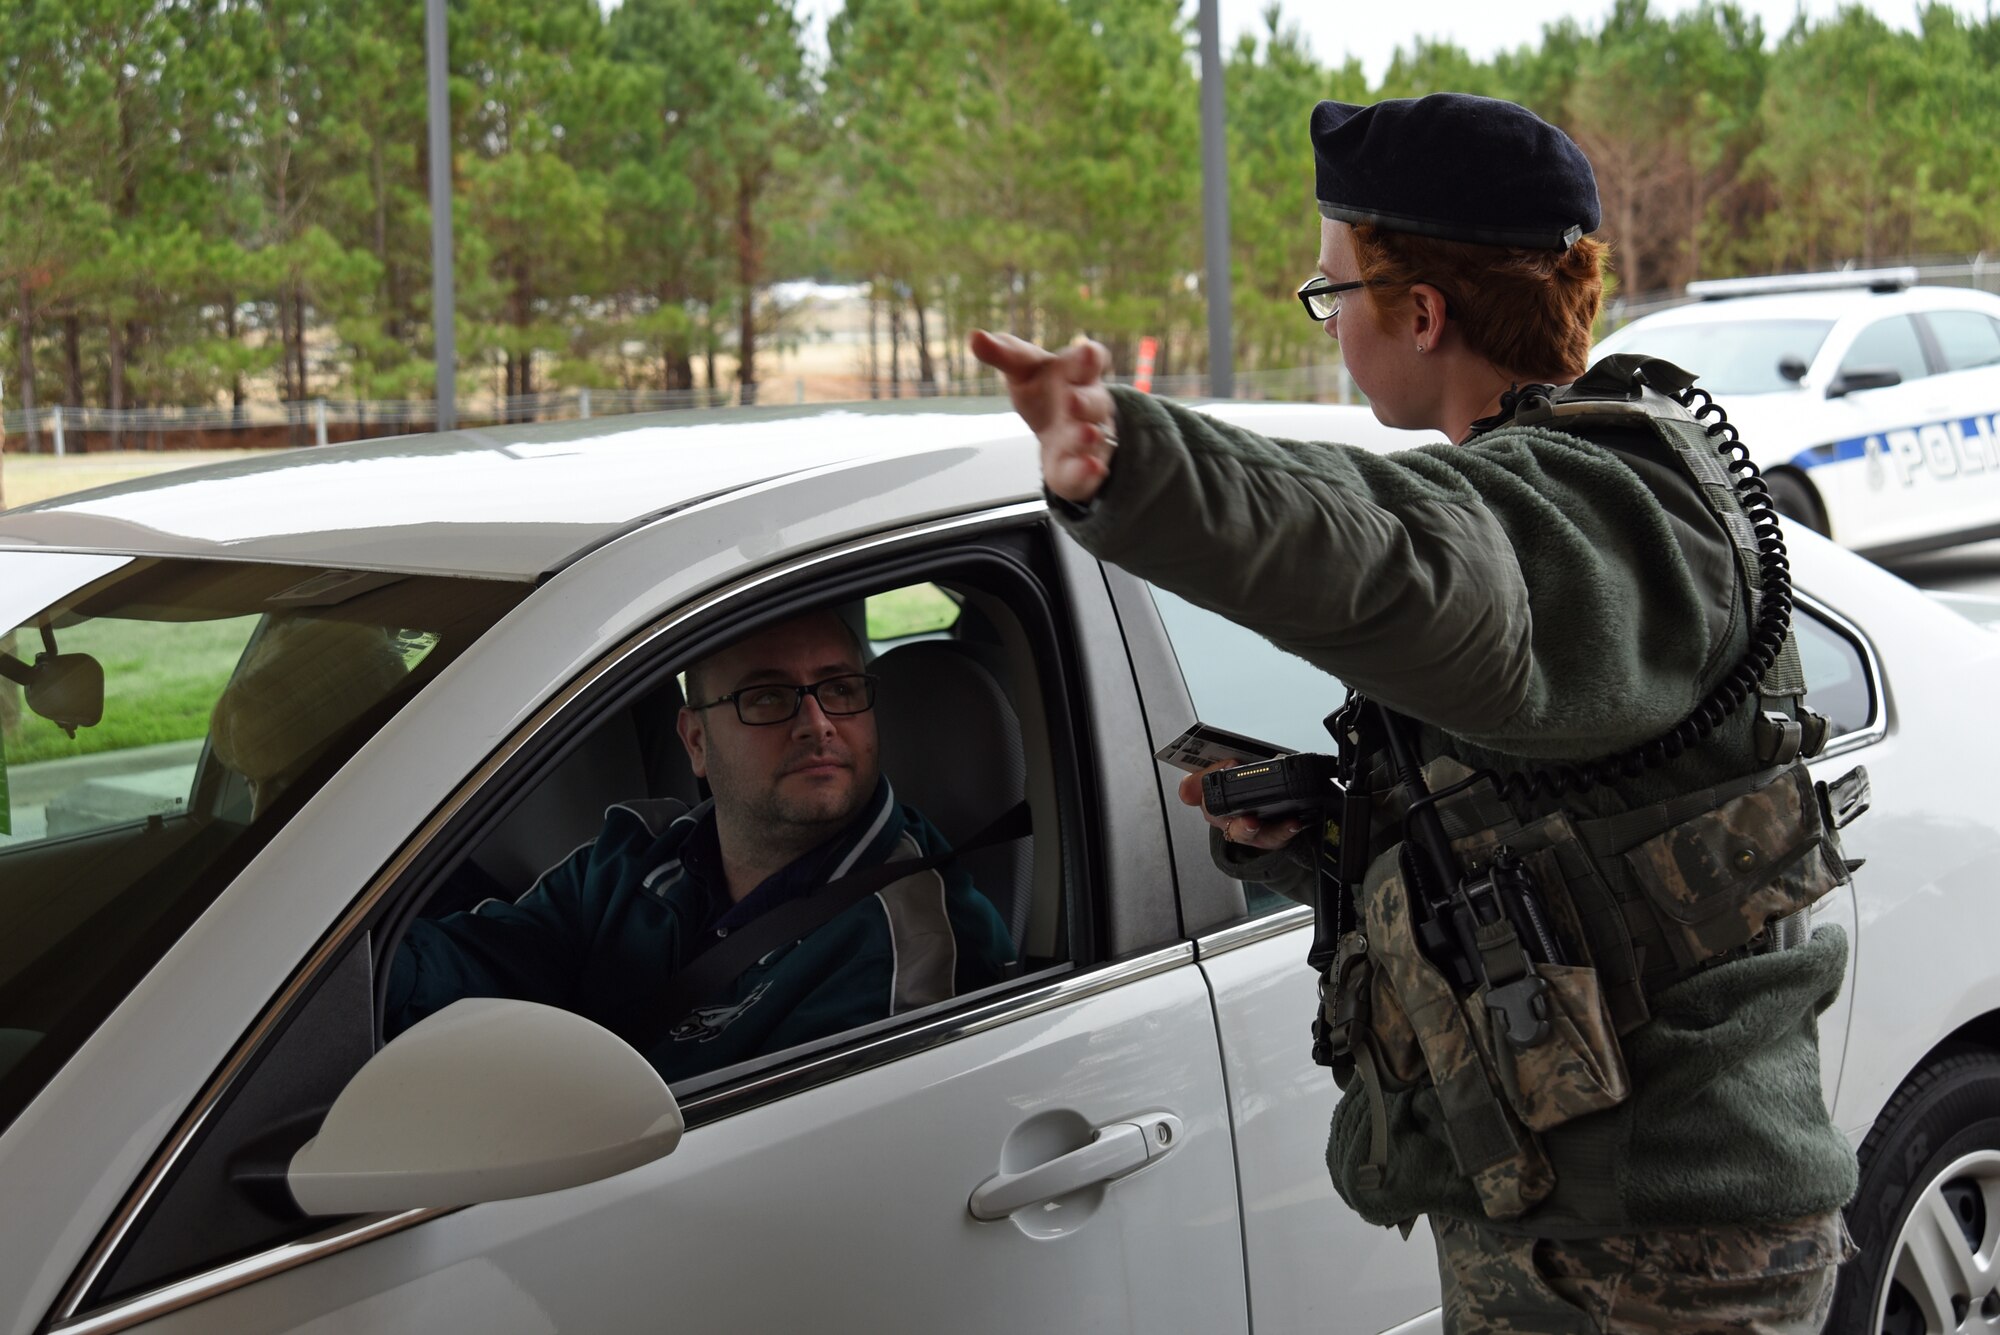 U.S. Air Force Airman 1st Class Andrea Pearson, 20th Security Forces Squadron entry controller, gives a base visitor directions at Shaw Air Force Base, S.C., Feb. 13, 2018.